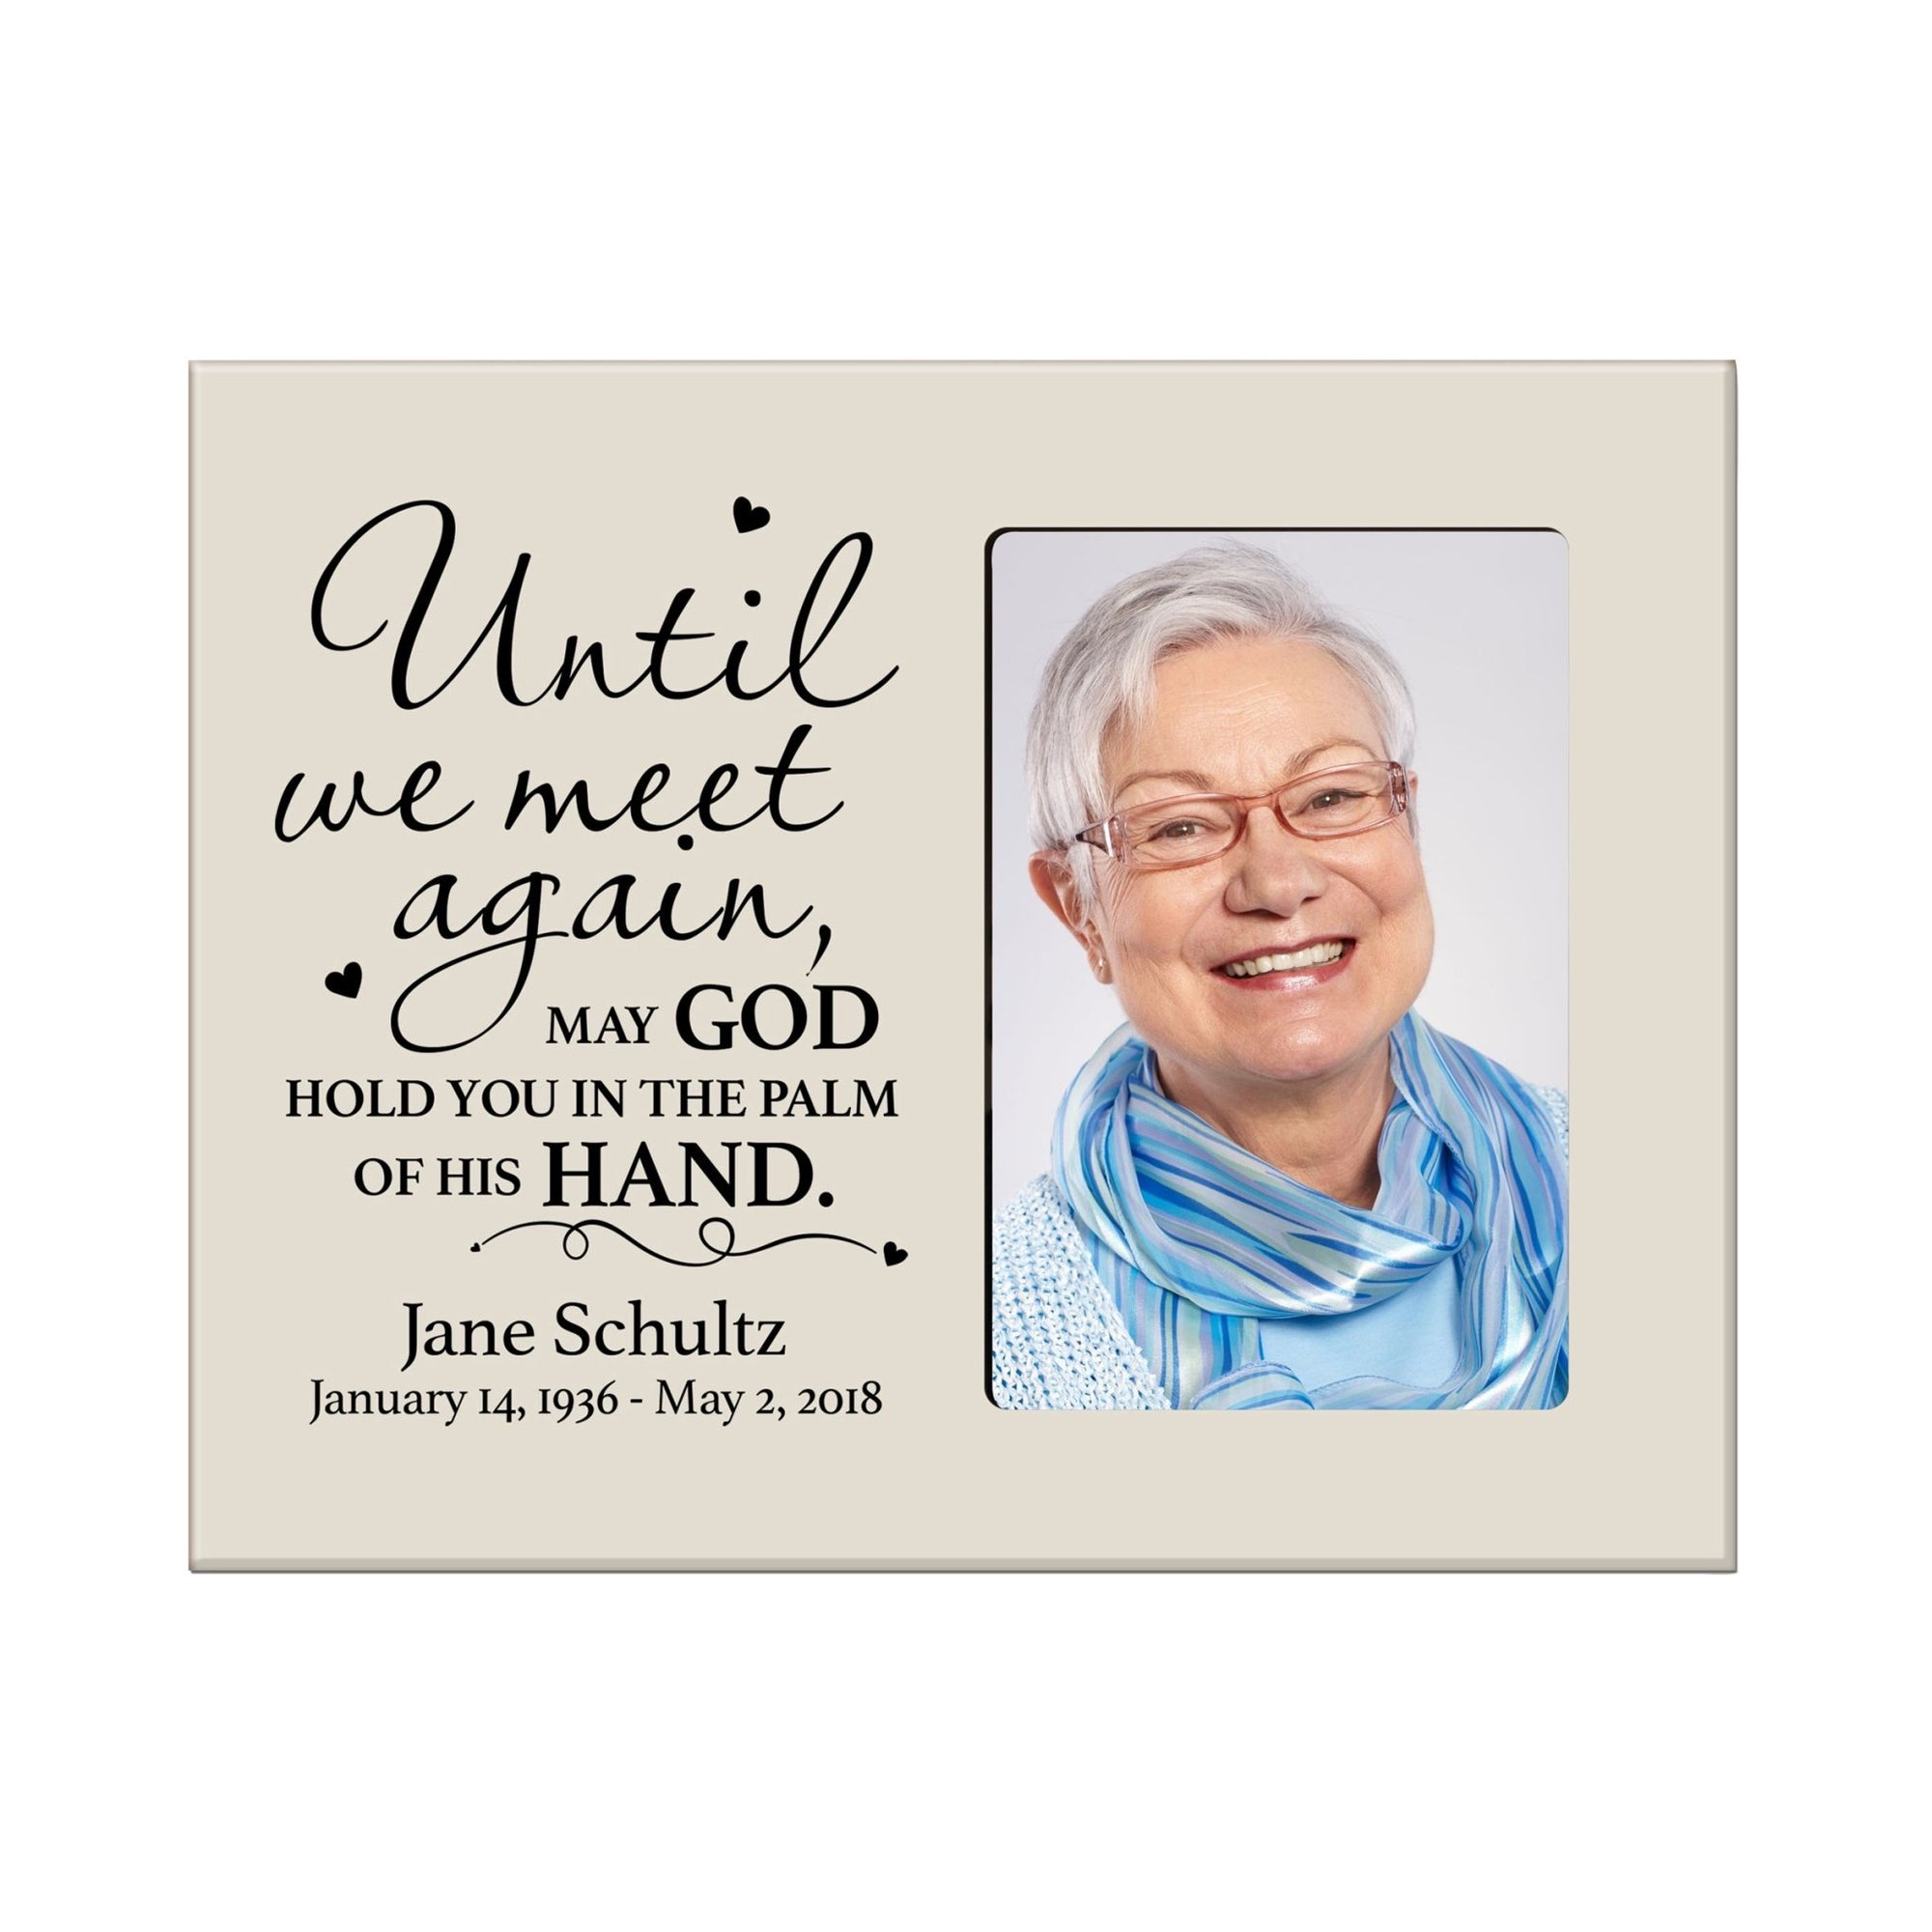 Personalized Wooden Memorial 8x10 Picture Frame holds 4x6 photo Until We Meet Again - LifeSong Milestones